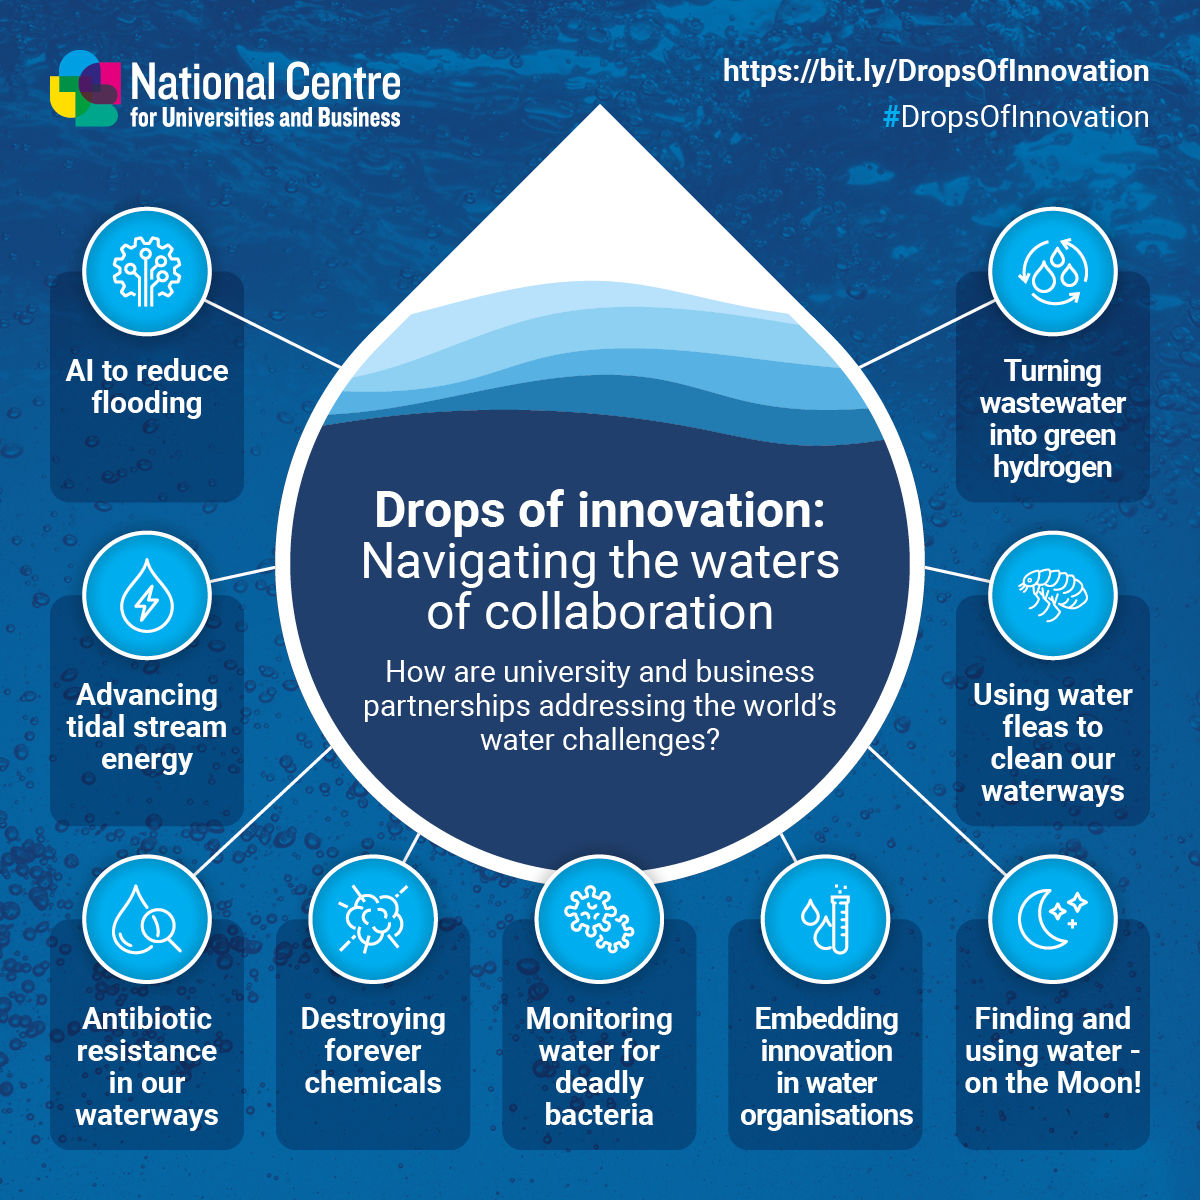 🚨New report🚨 Today @NCUBtweets are launching 'Drops of Innovation', a collection of #collaboration case studies that show how UK universities and businesses are working together to tackle water challenges #DropsOfInnovation 👉bit.ly/DropsOfInnovat…